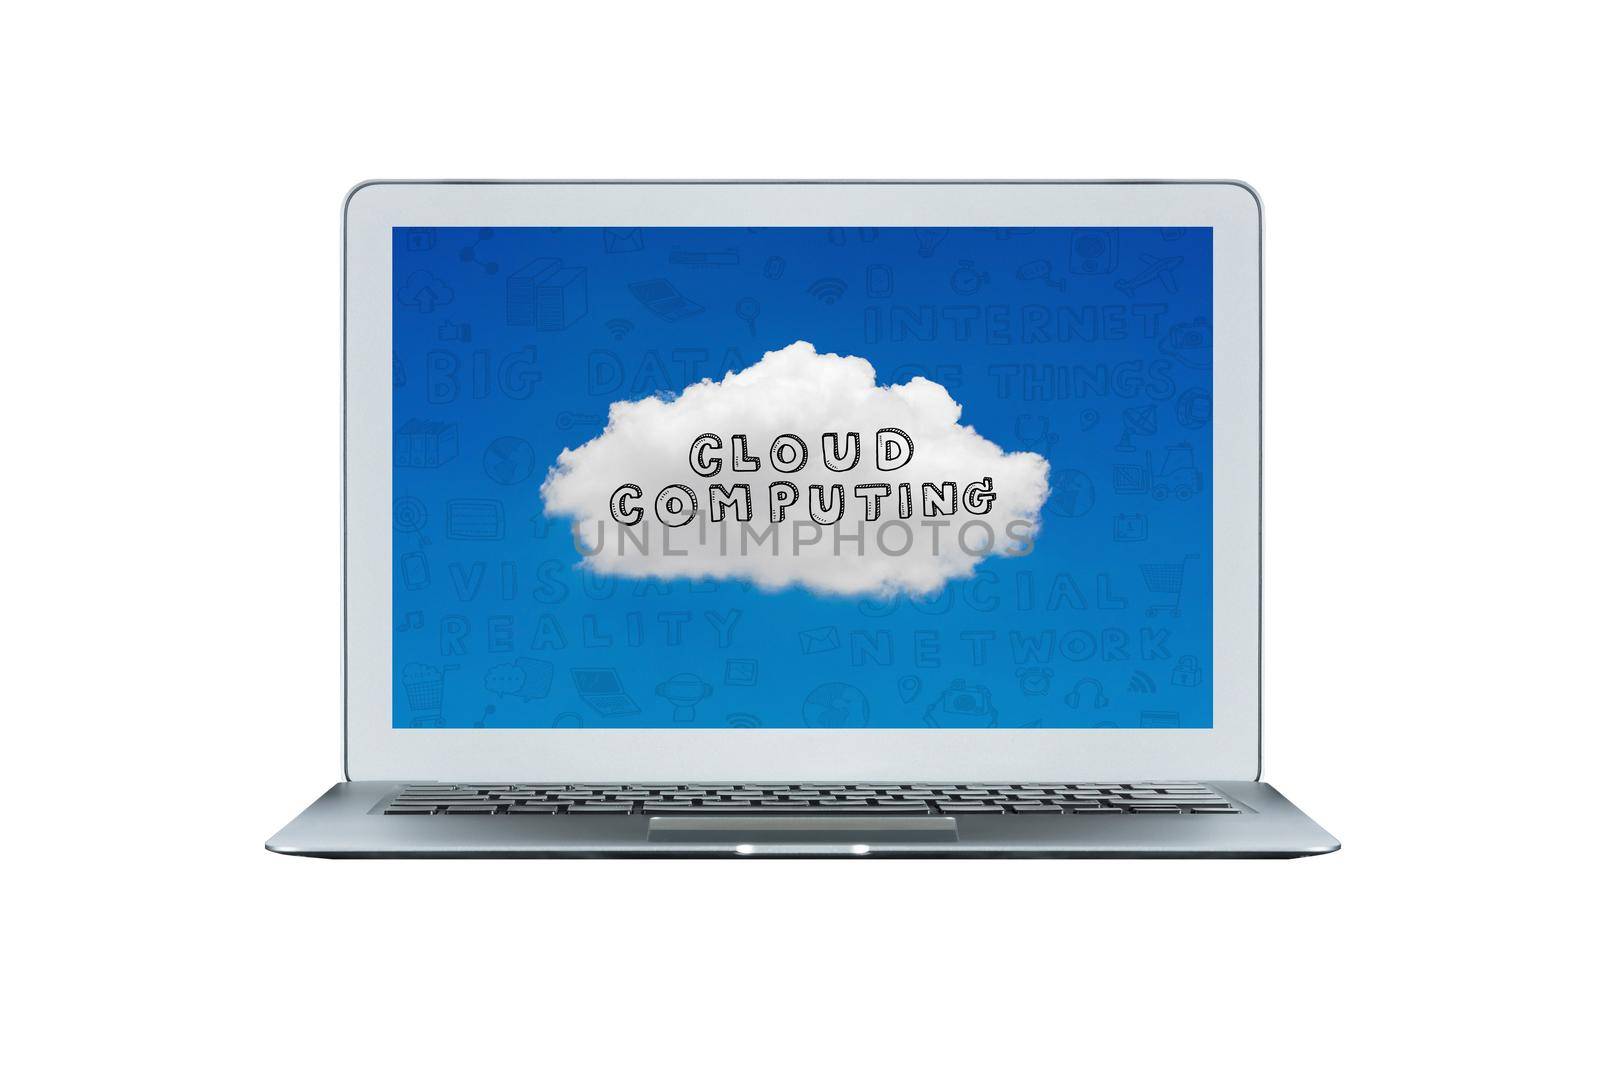 Smart laptop with cloud computing background on screen for internet of things technology and smart city concept.